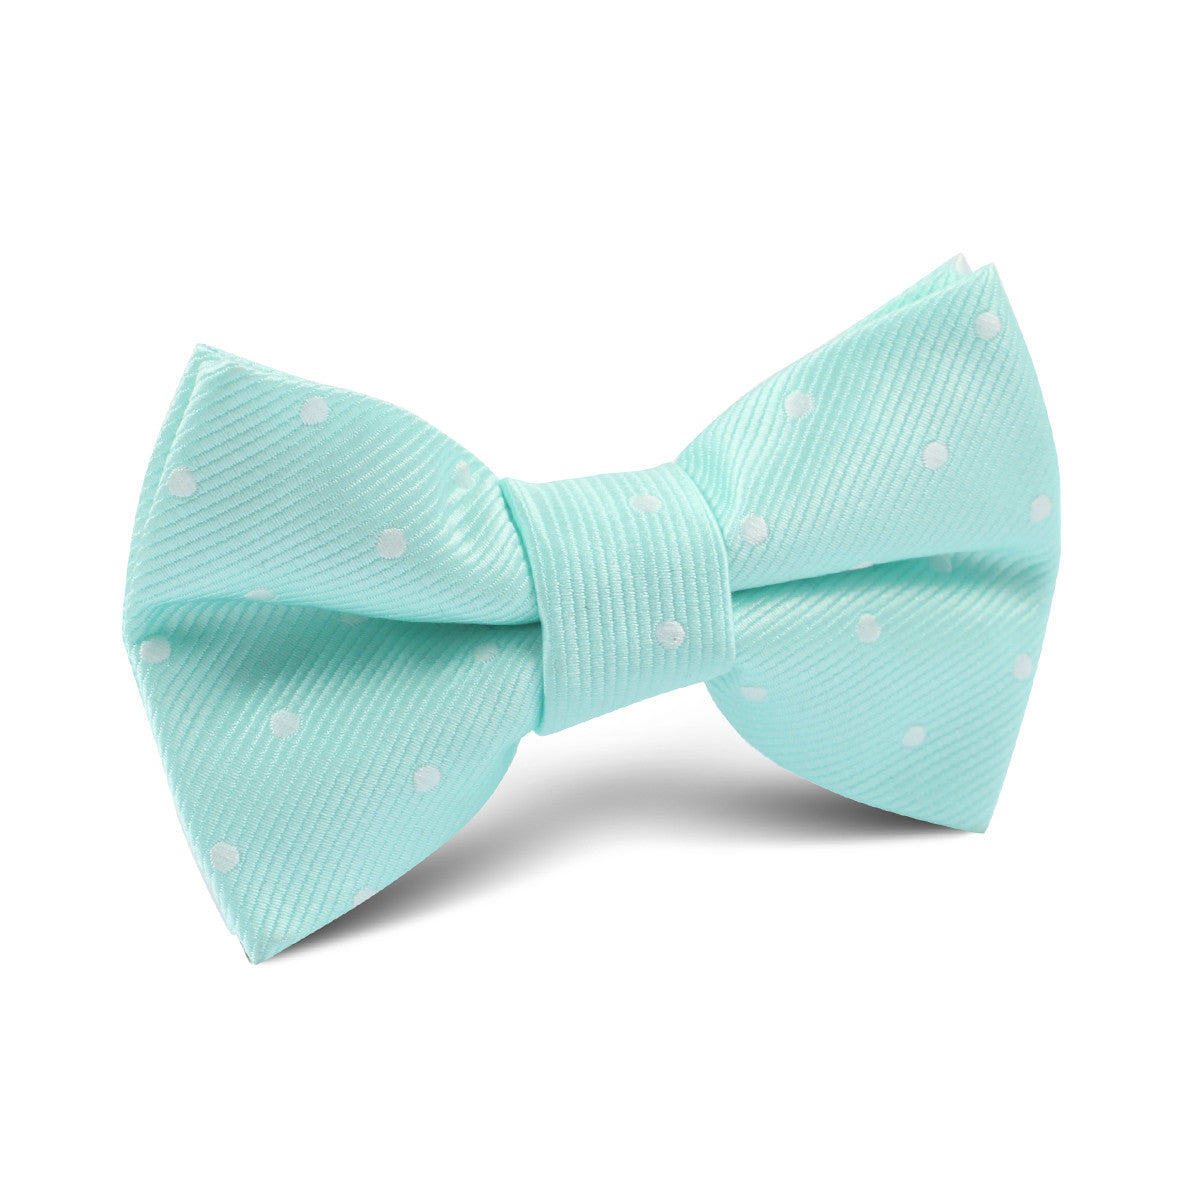 Mint Green with White Polka Dots Kids Bow Tie